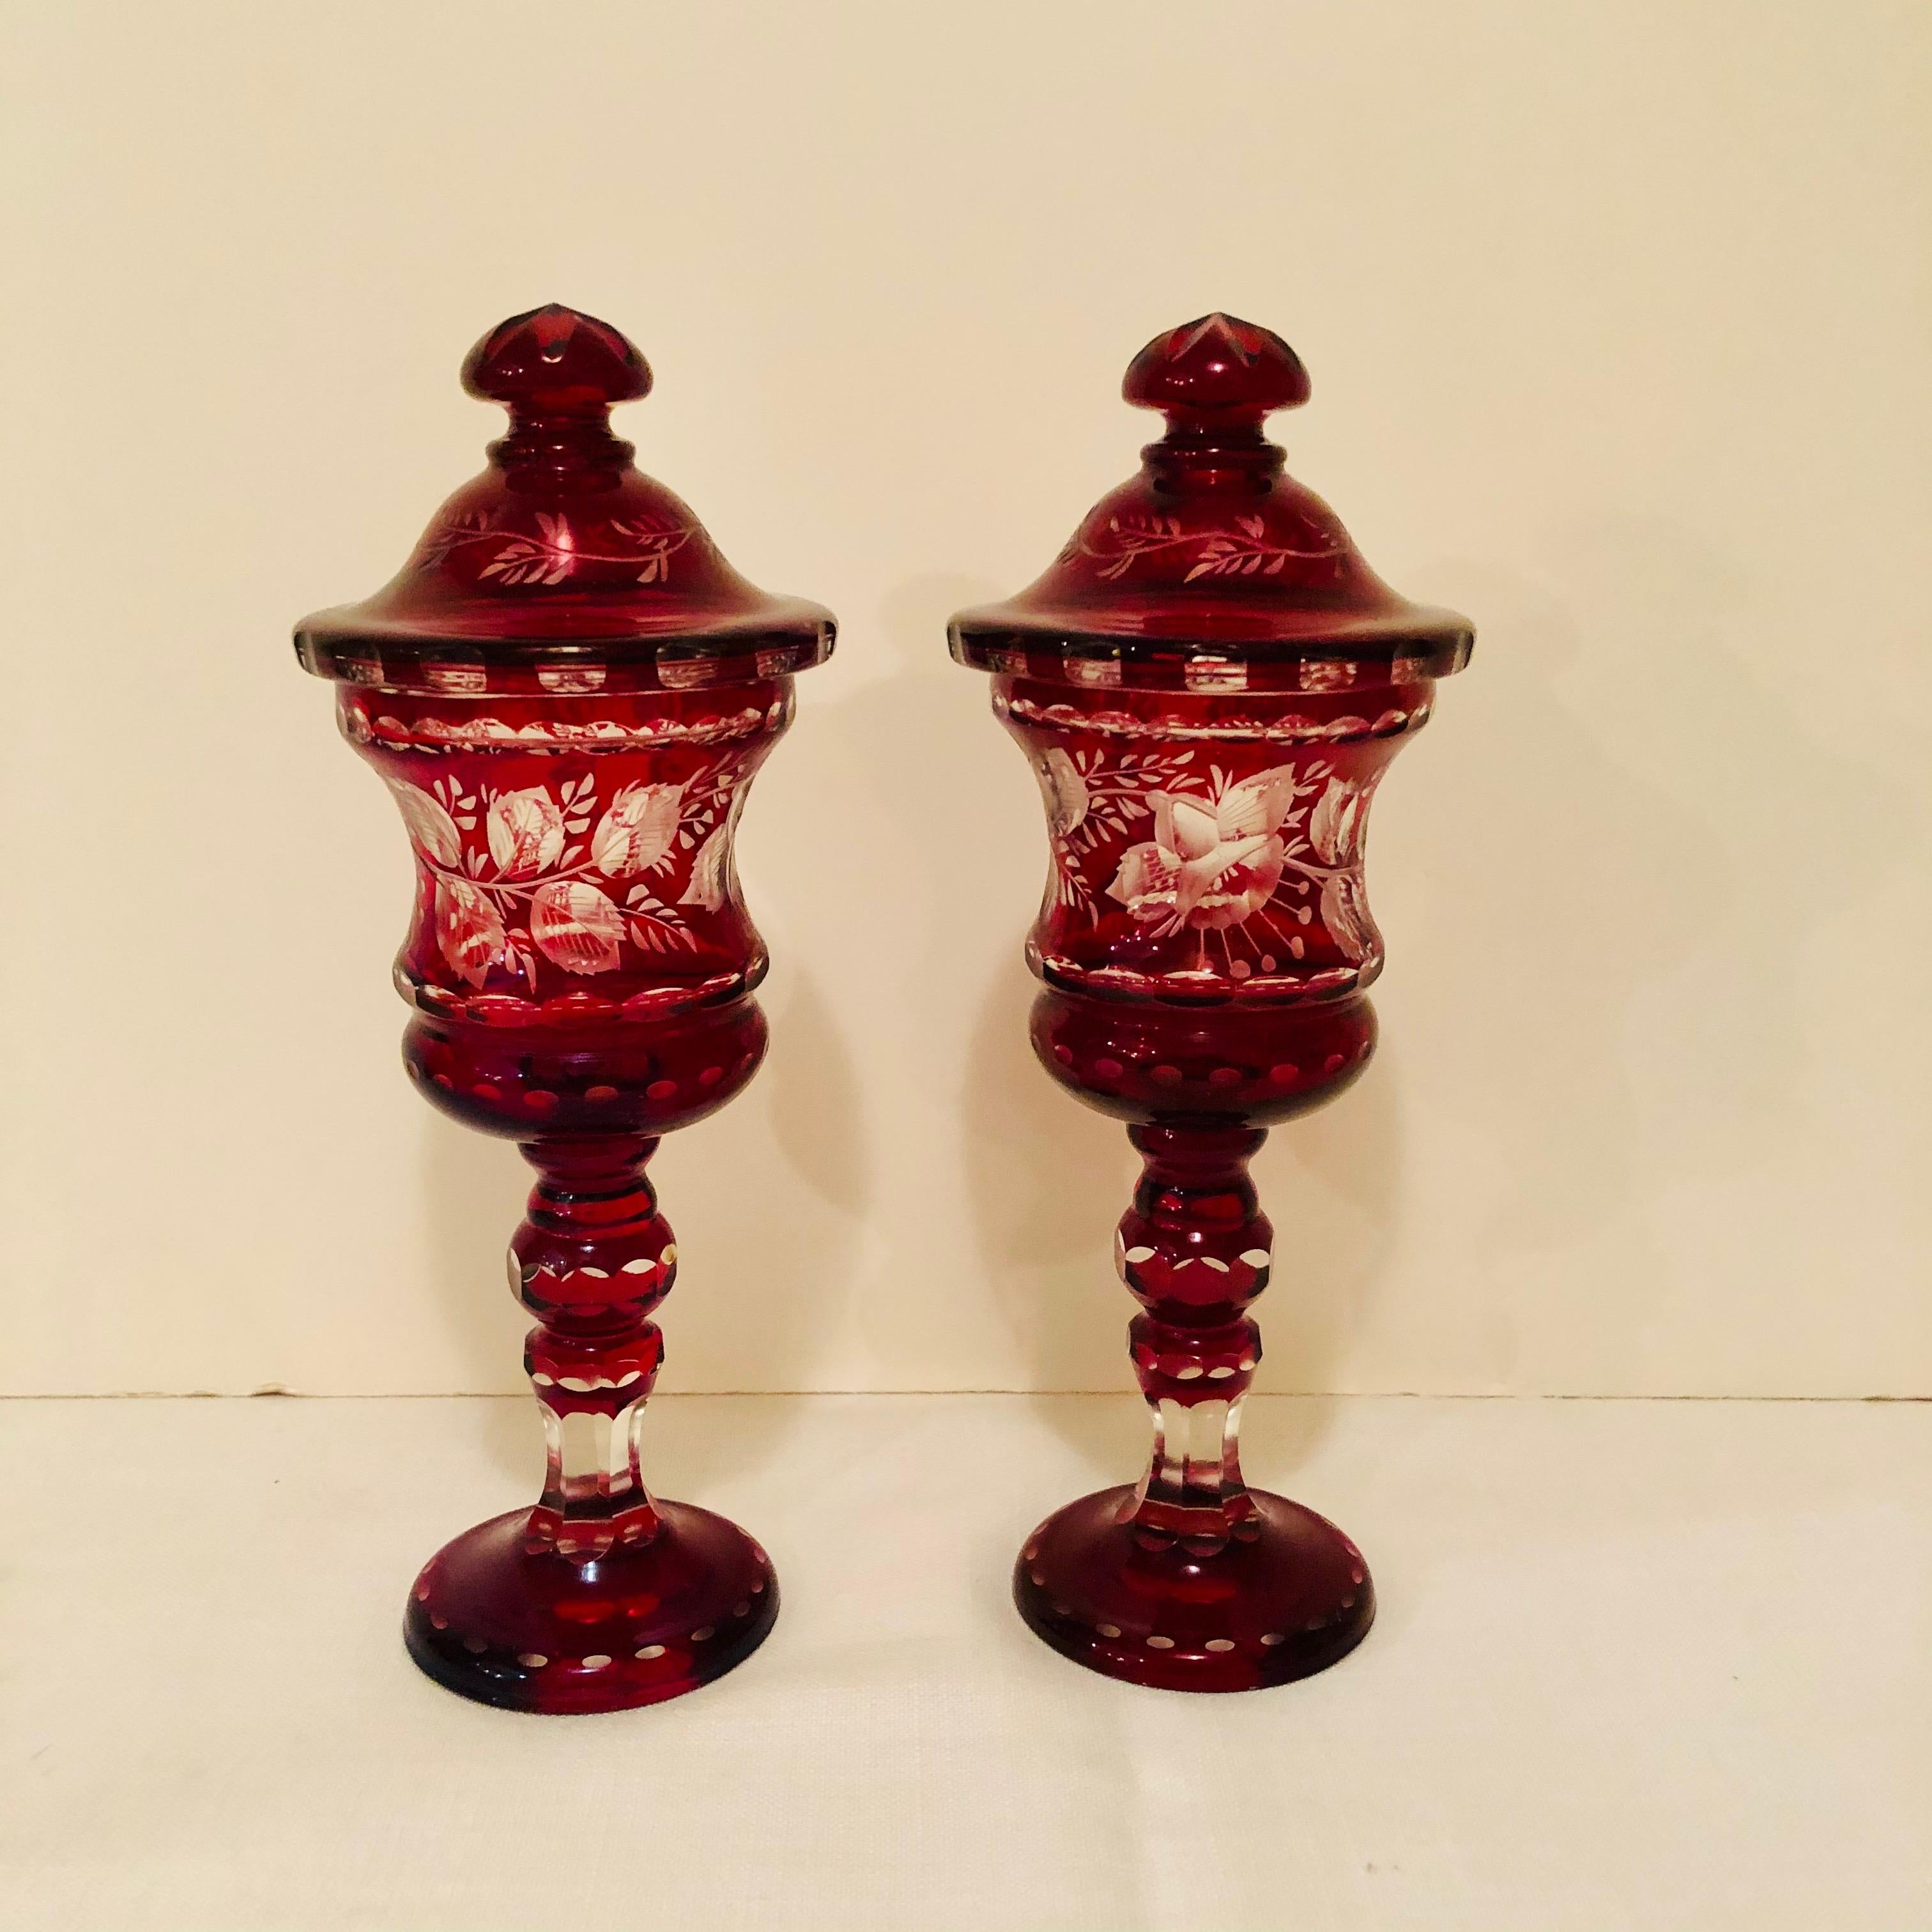 These are a stunning pair of red Bohemian covered vases with wheel cut decorations of flowers and leaves. They are 11.5 inches tall and are from circa 1900-1920. They would make a beautiful decoration on any dining room table, on a sideboard, in a